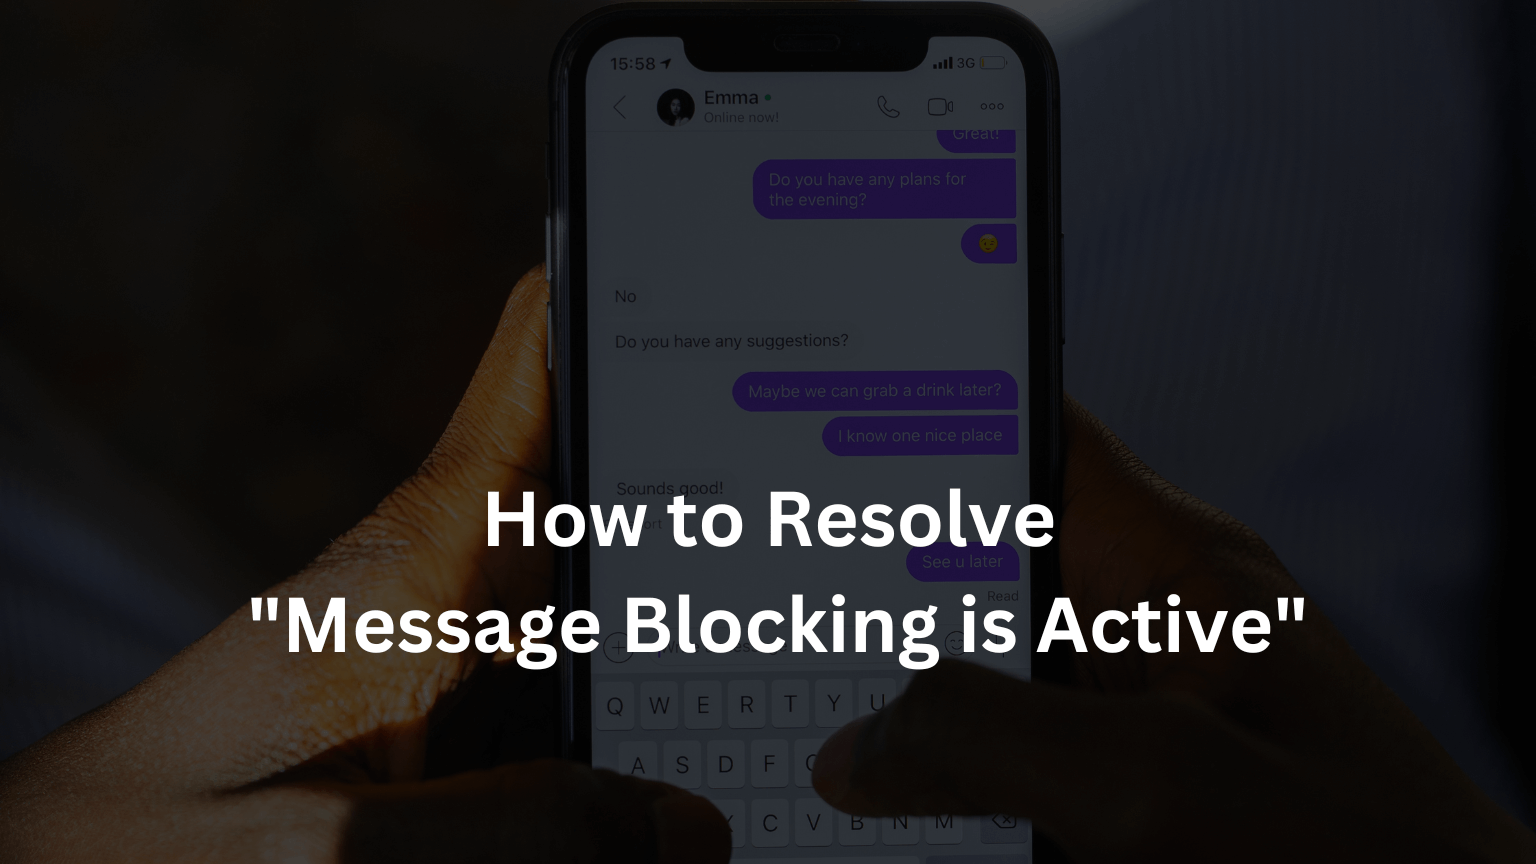 How to Resolve "Message Blocking is Active"